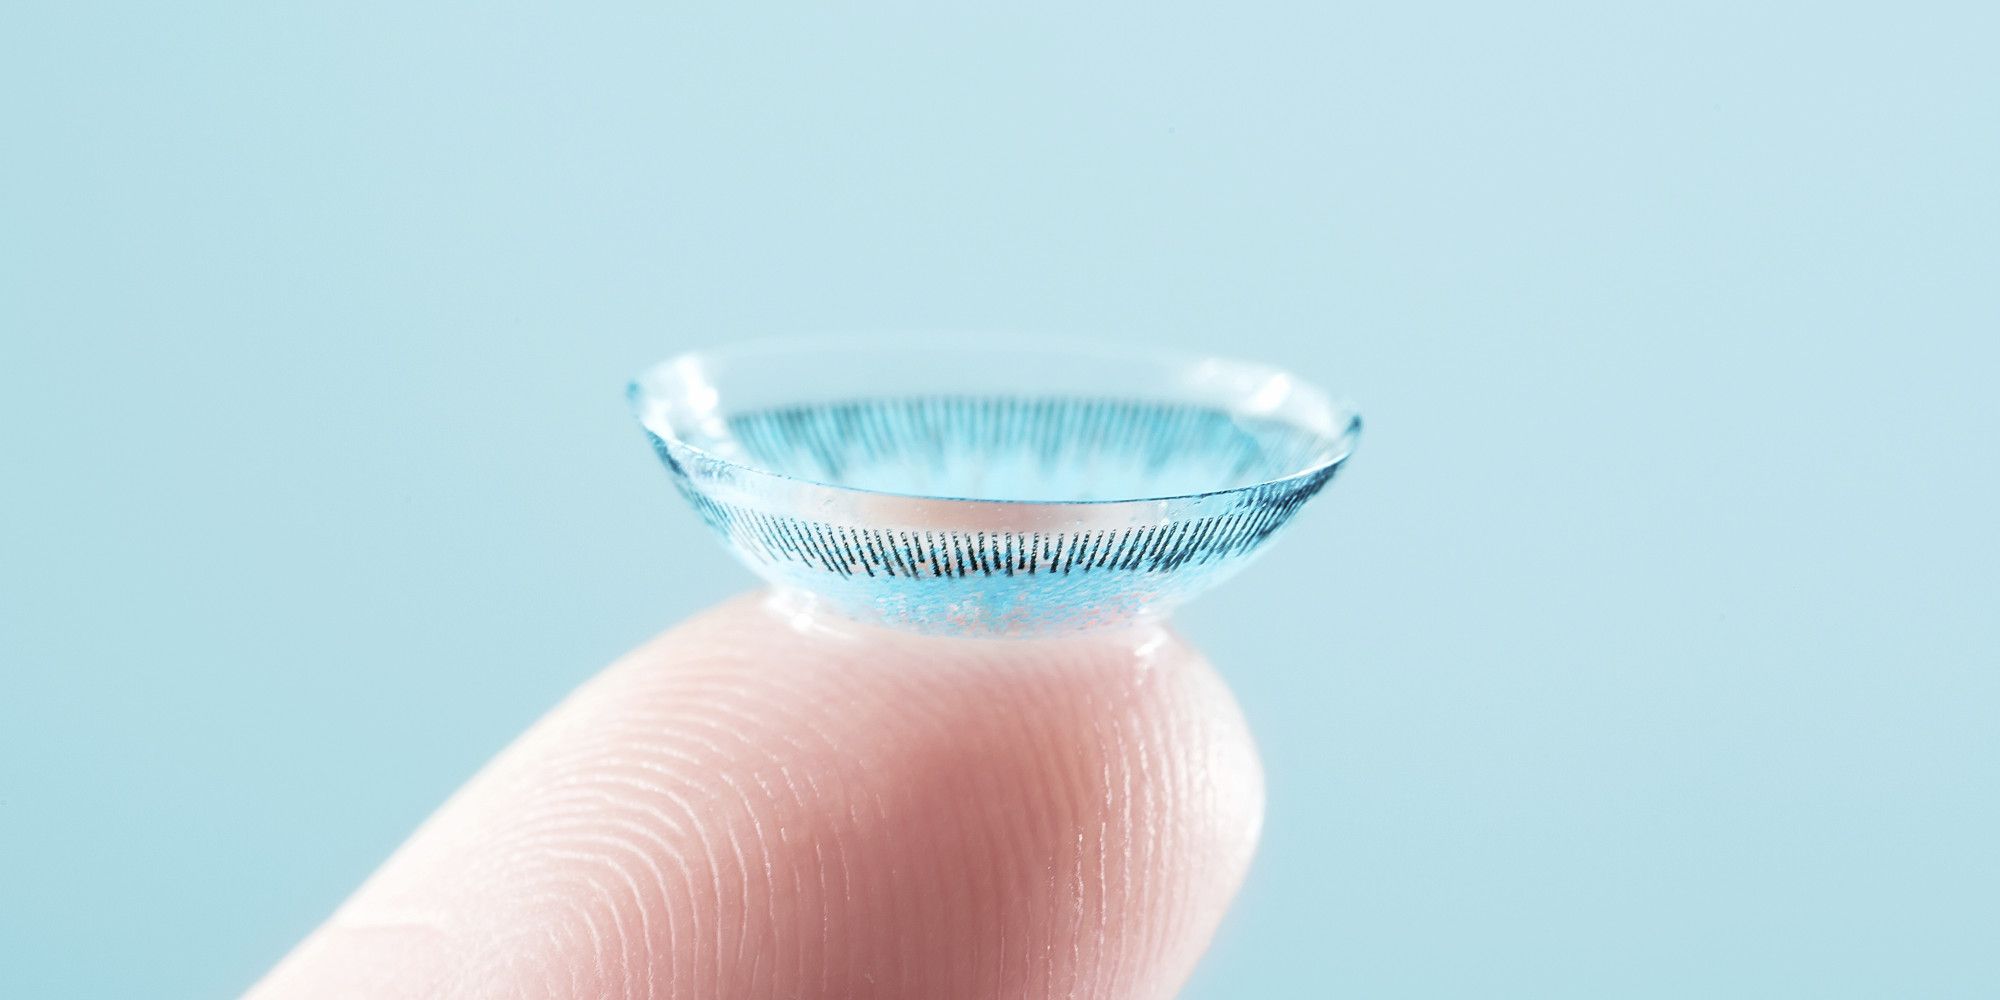 The best contact lenses in 2022